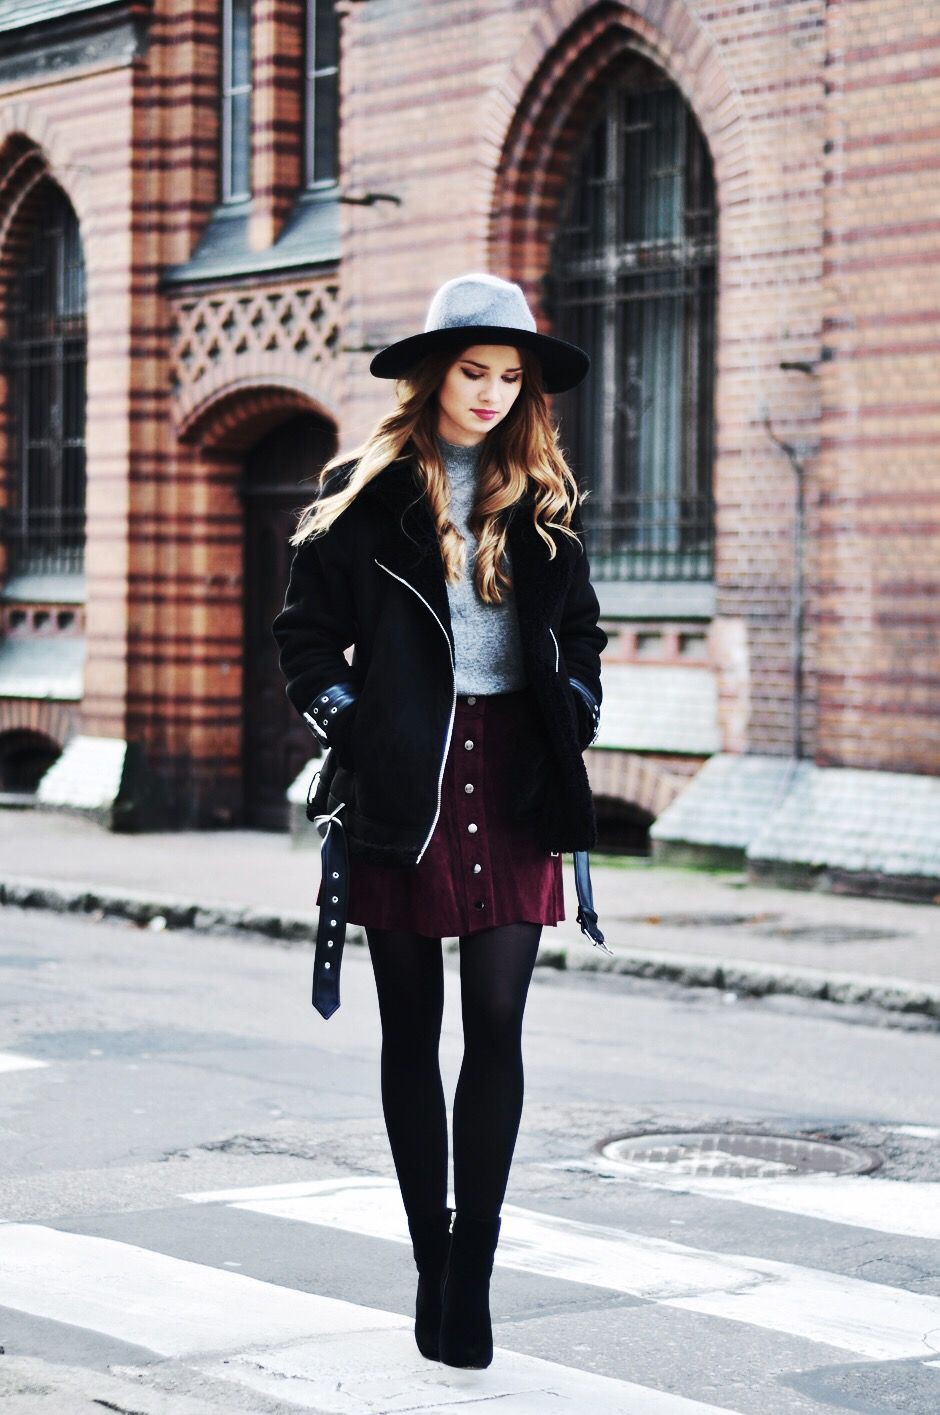 Cute winter outfits skirt, Winter clothing | Buttoned Skirt Outfits ...